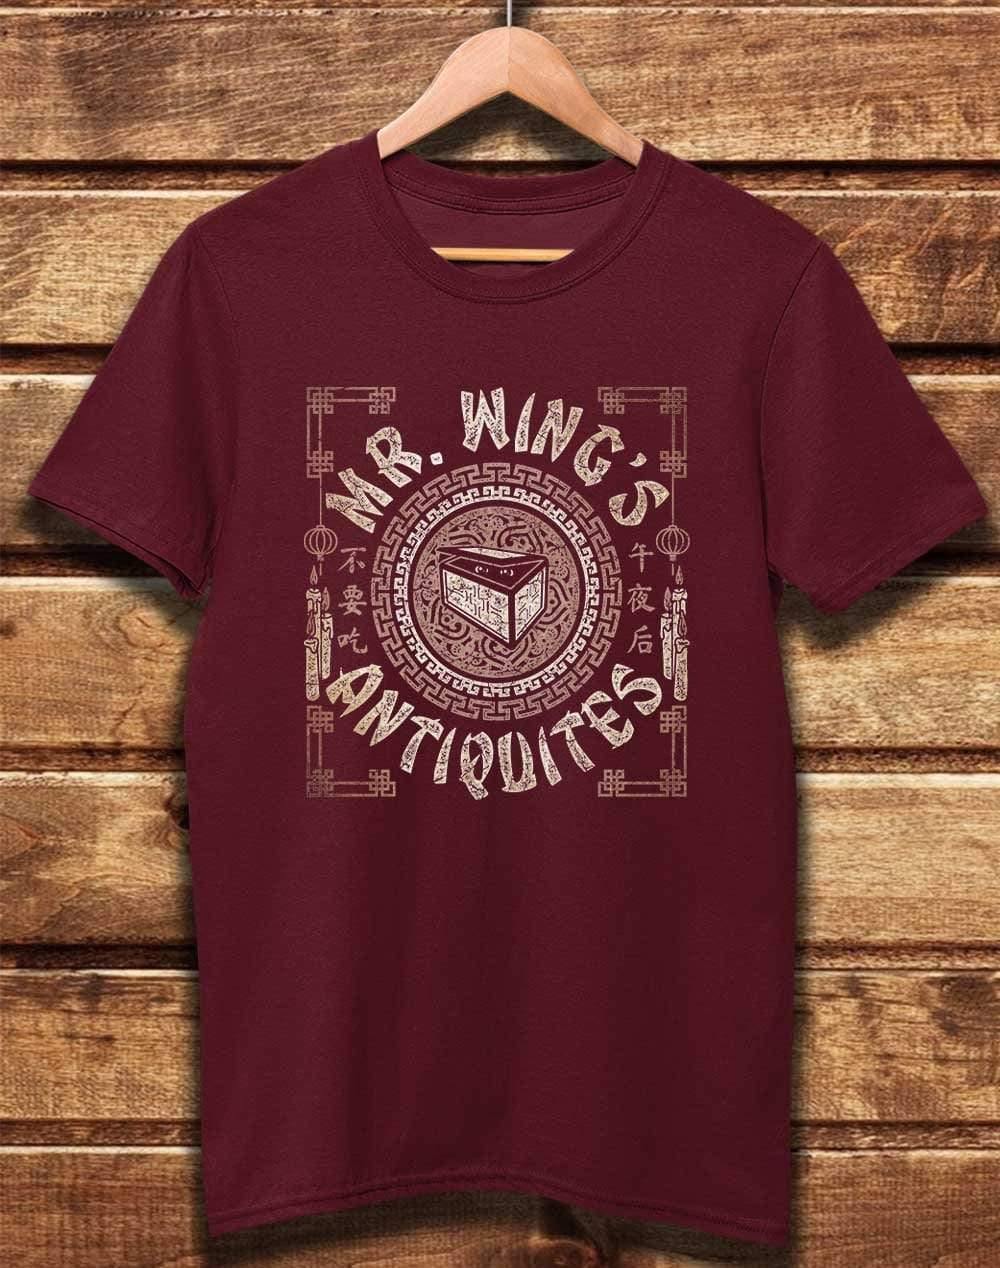 DELUXE Mr Wing's Antiquites Organic Cotton T-Shirt XS / Burgundy  - Off World Tees